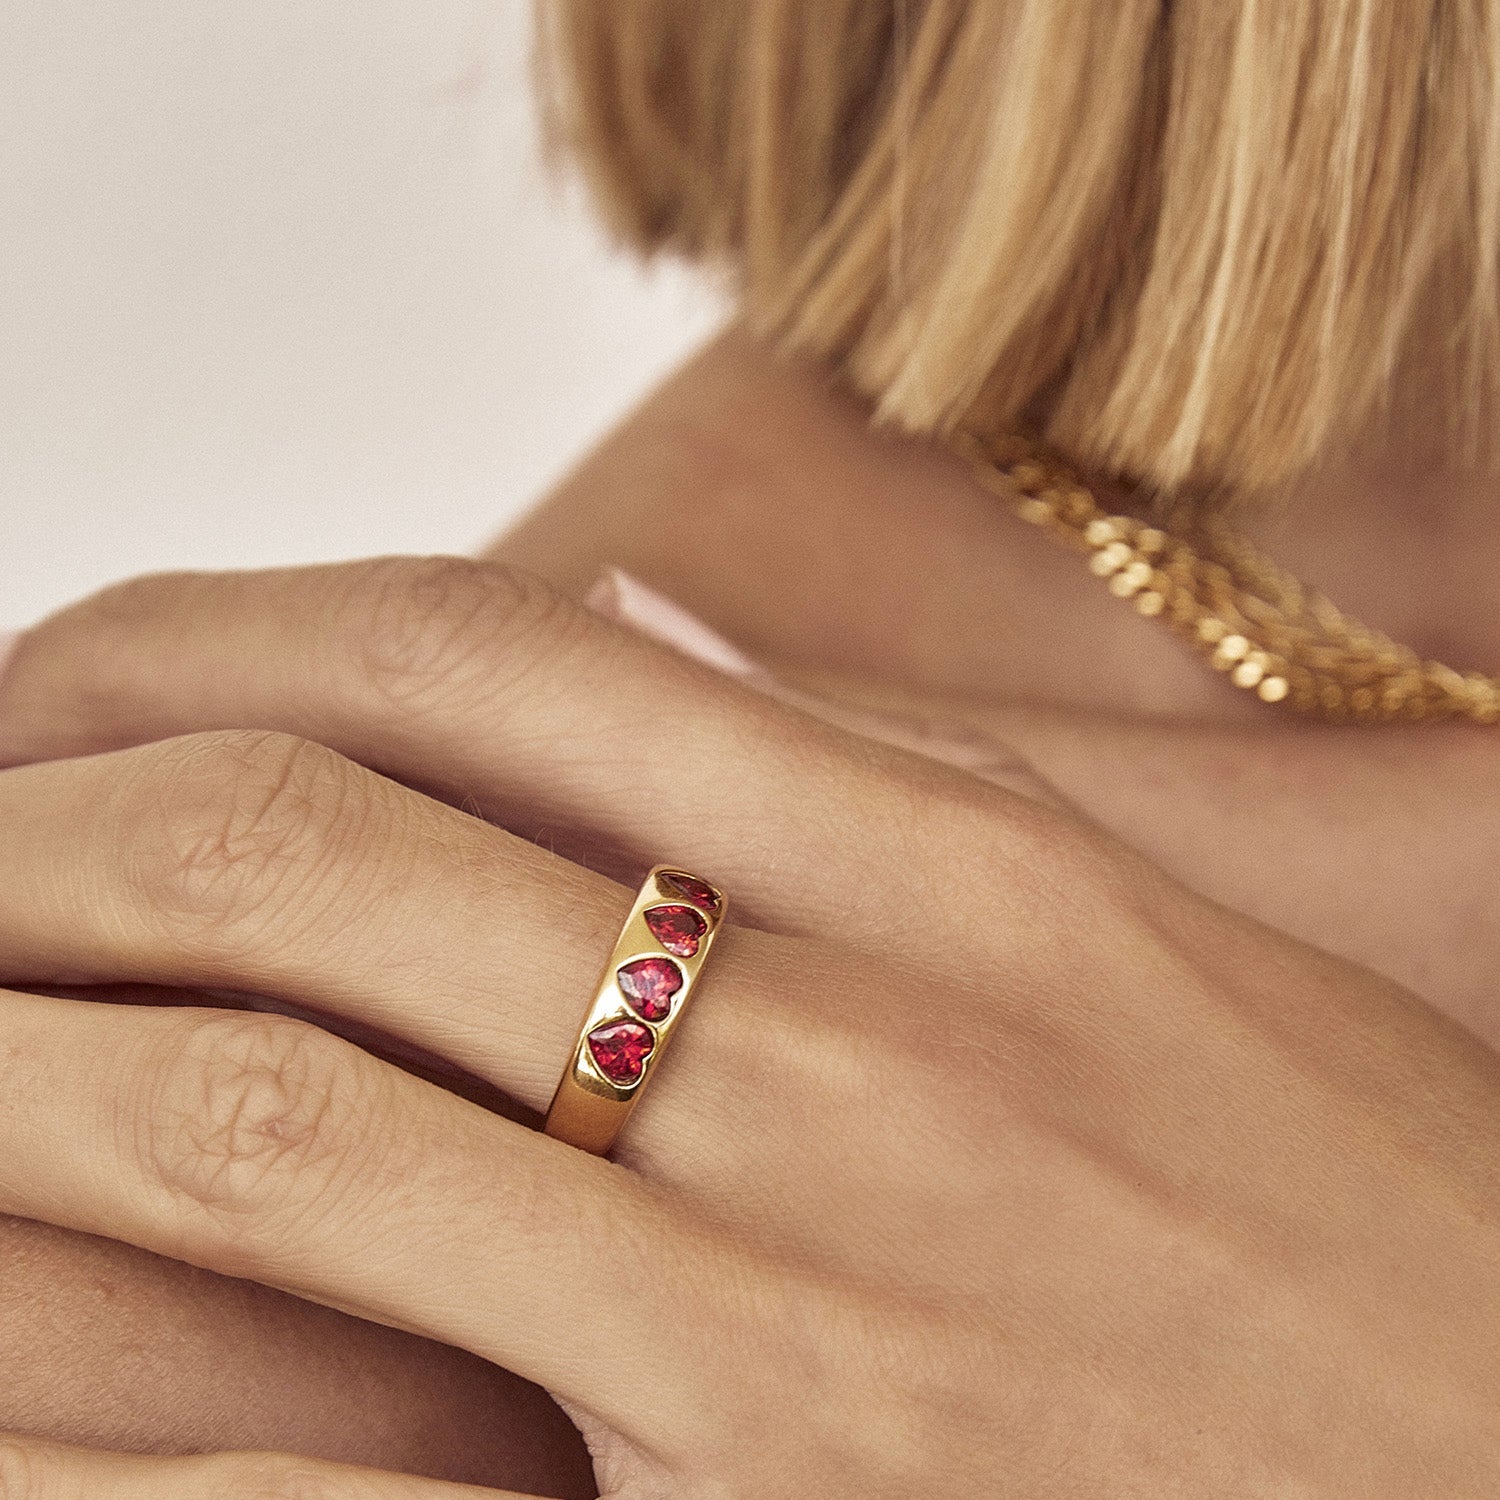 J'adore Gold Ring - Red